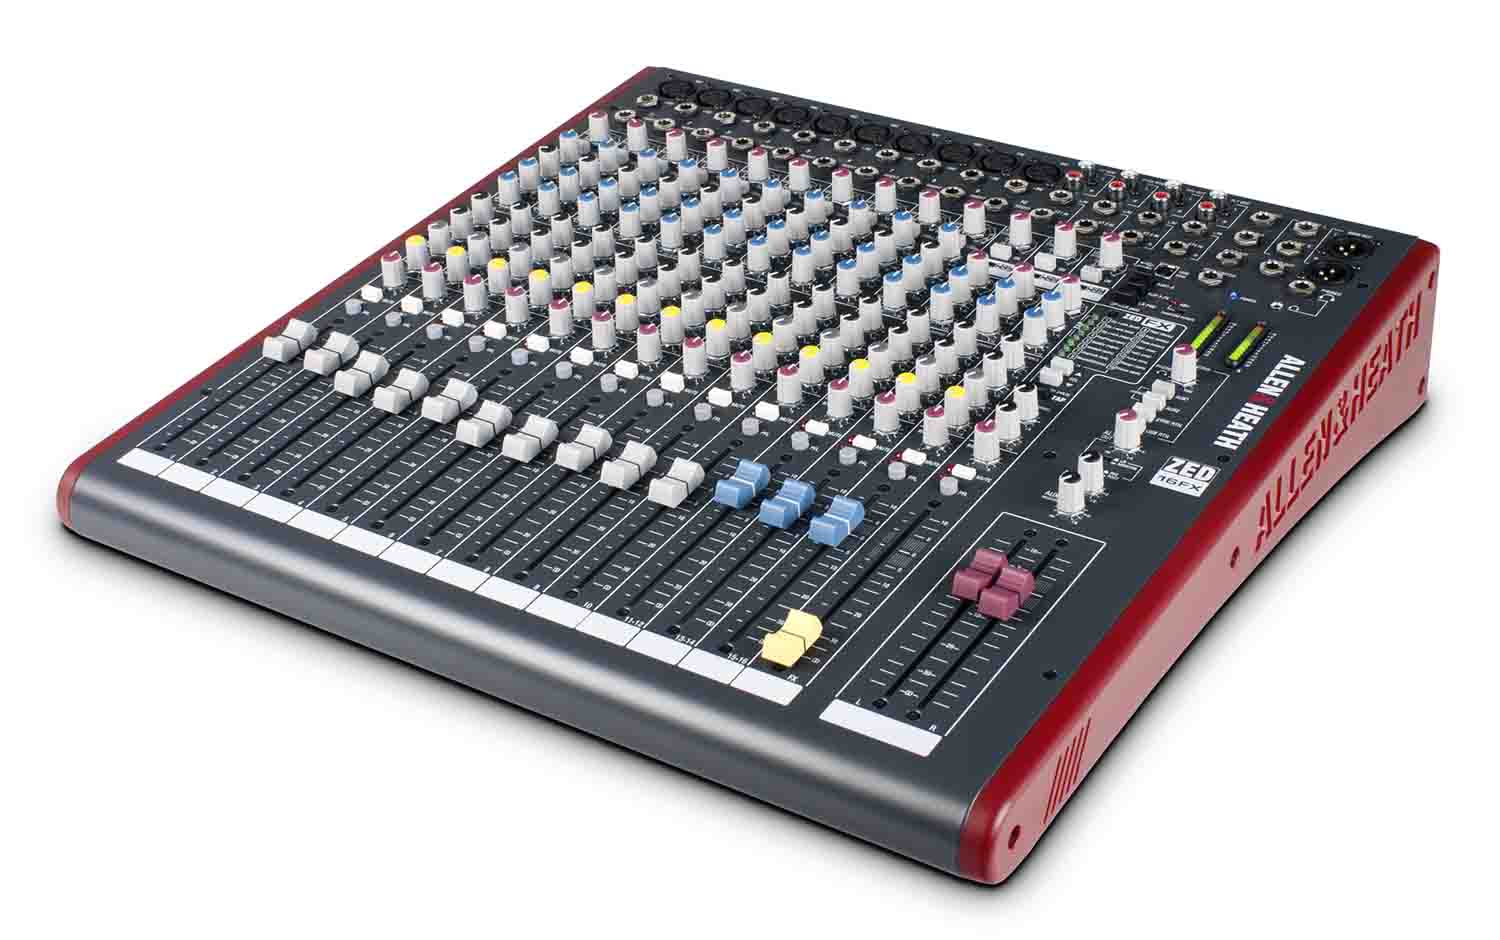 Allen & Heath ZED-16FX Multipurpose 16-Channel USB Mixer with FX for Live Sound and Recording - Hollywood DJ